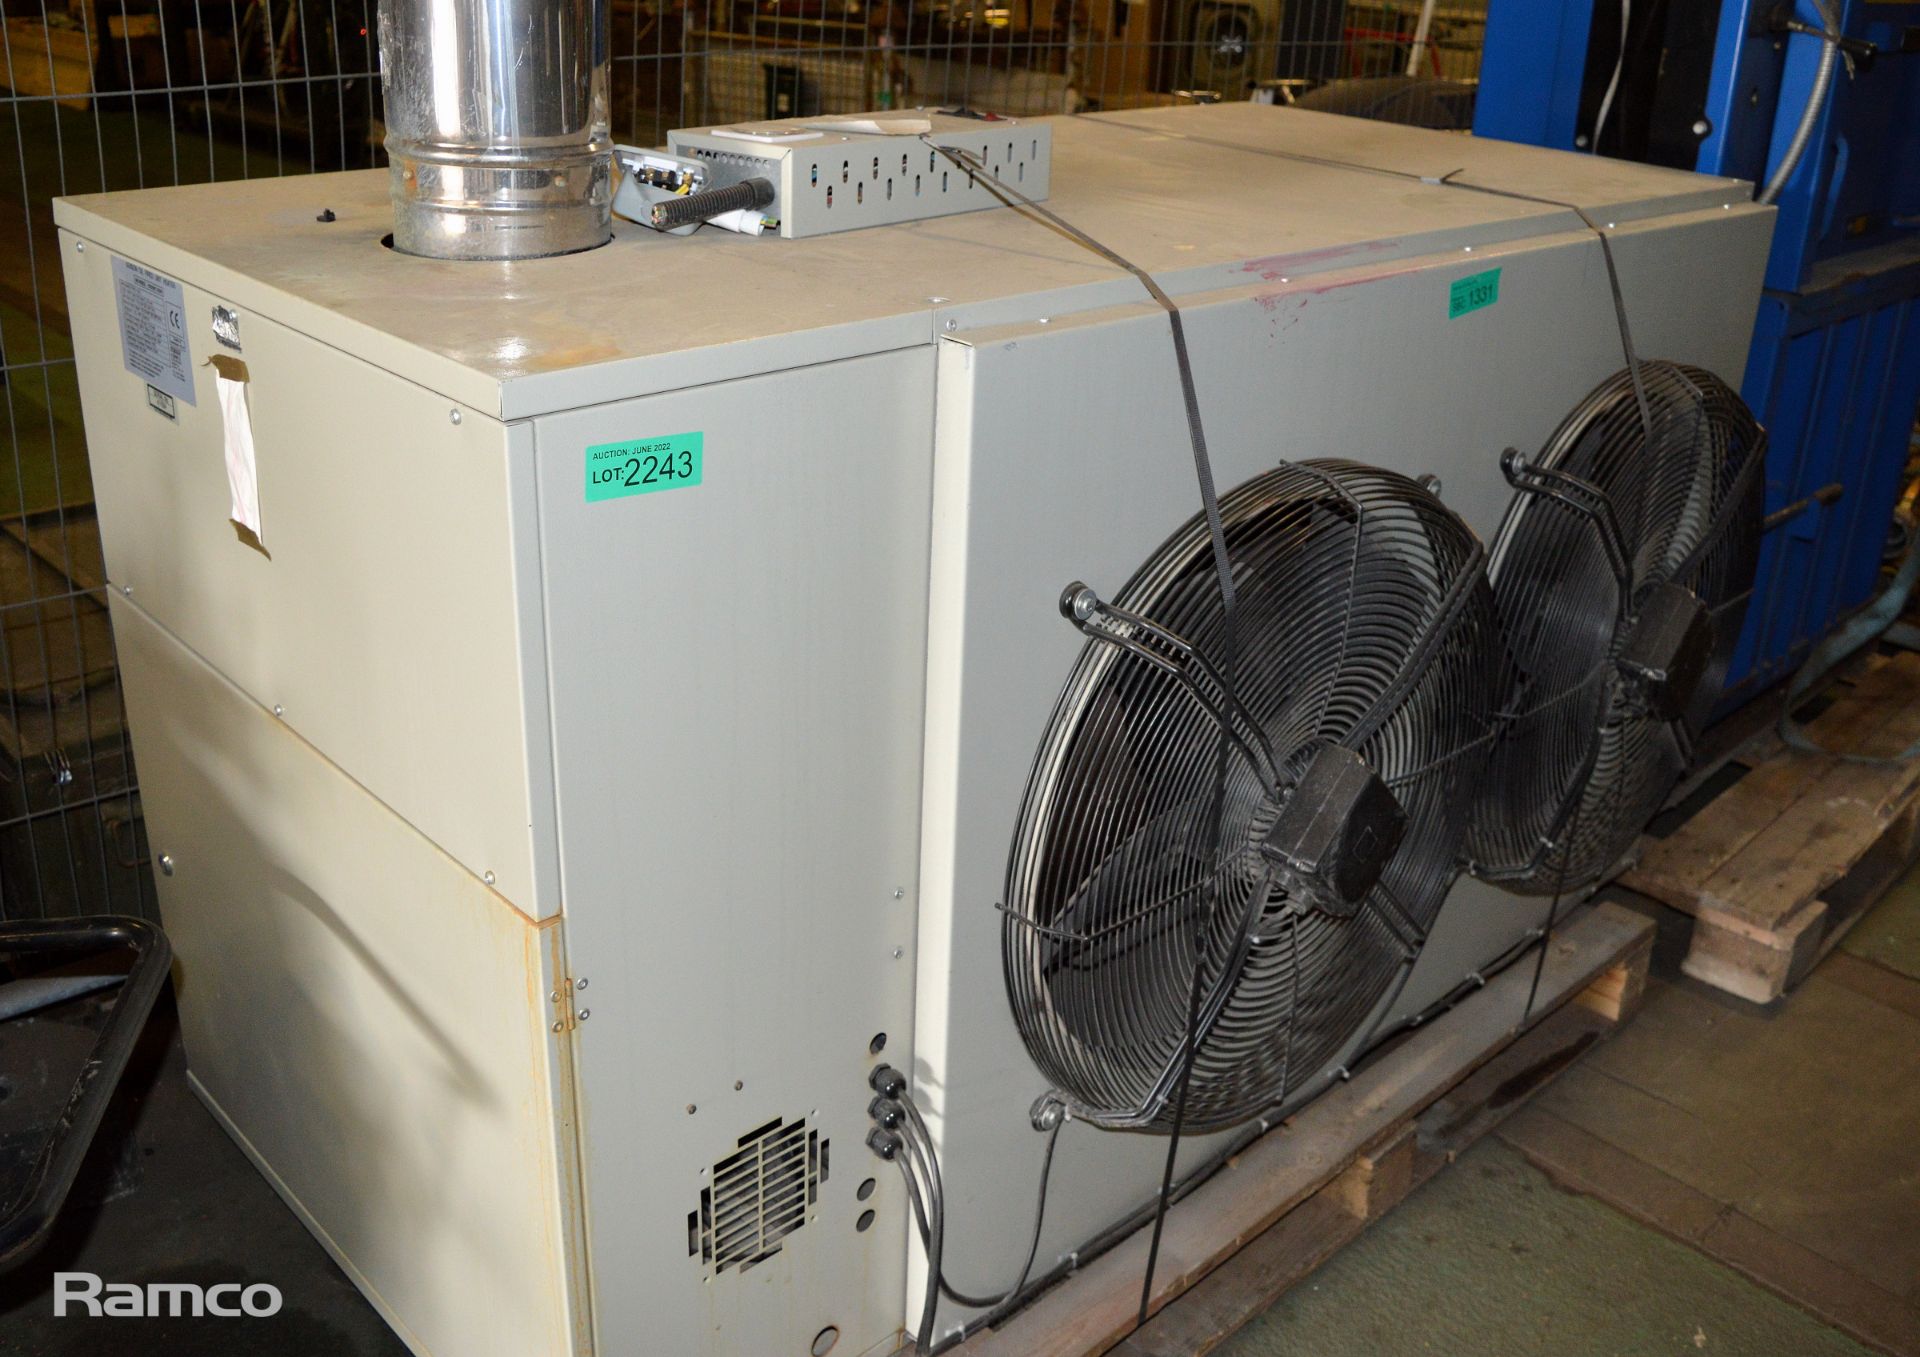 Benson oil fired unit heater - model OUHC350 - type B23 - Image 2 of 5